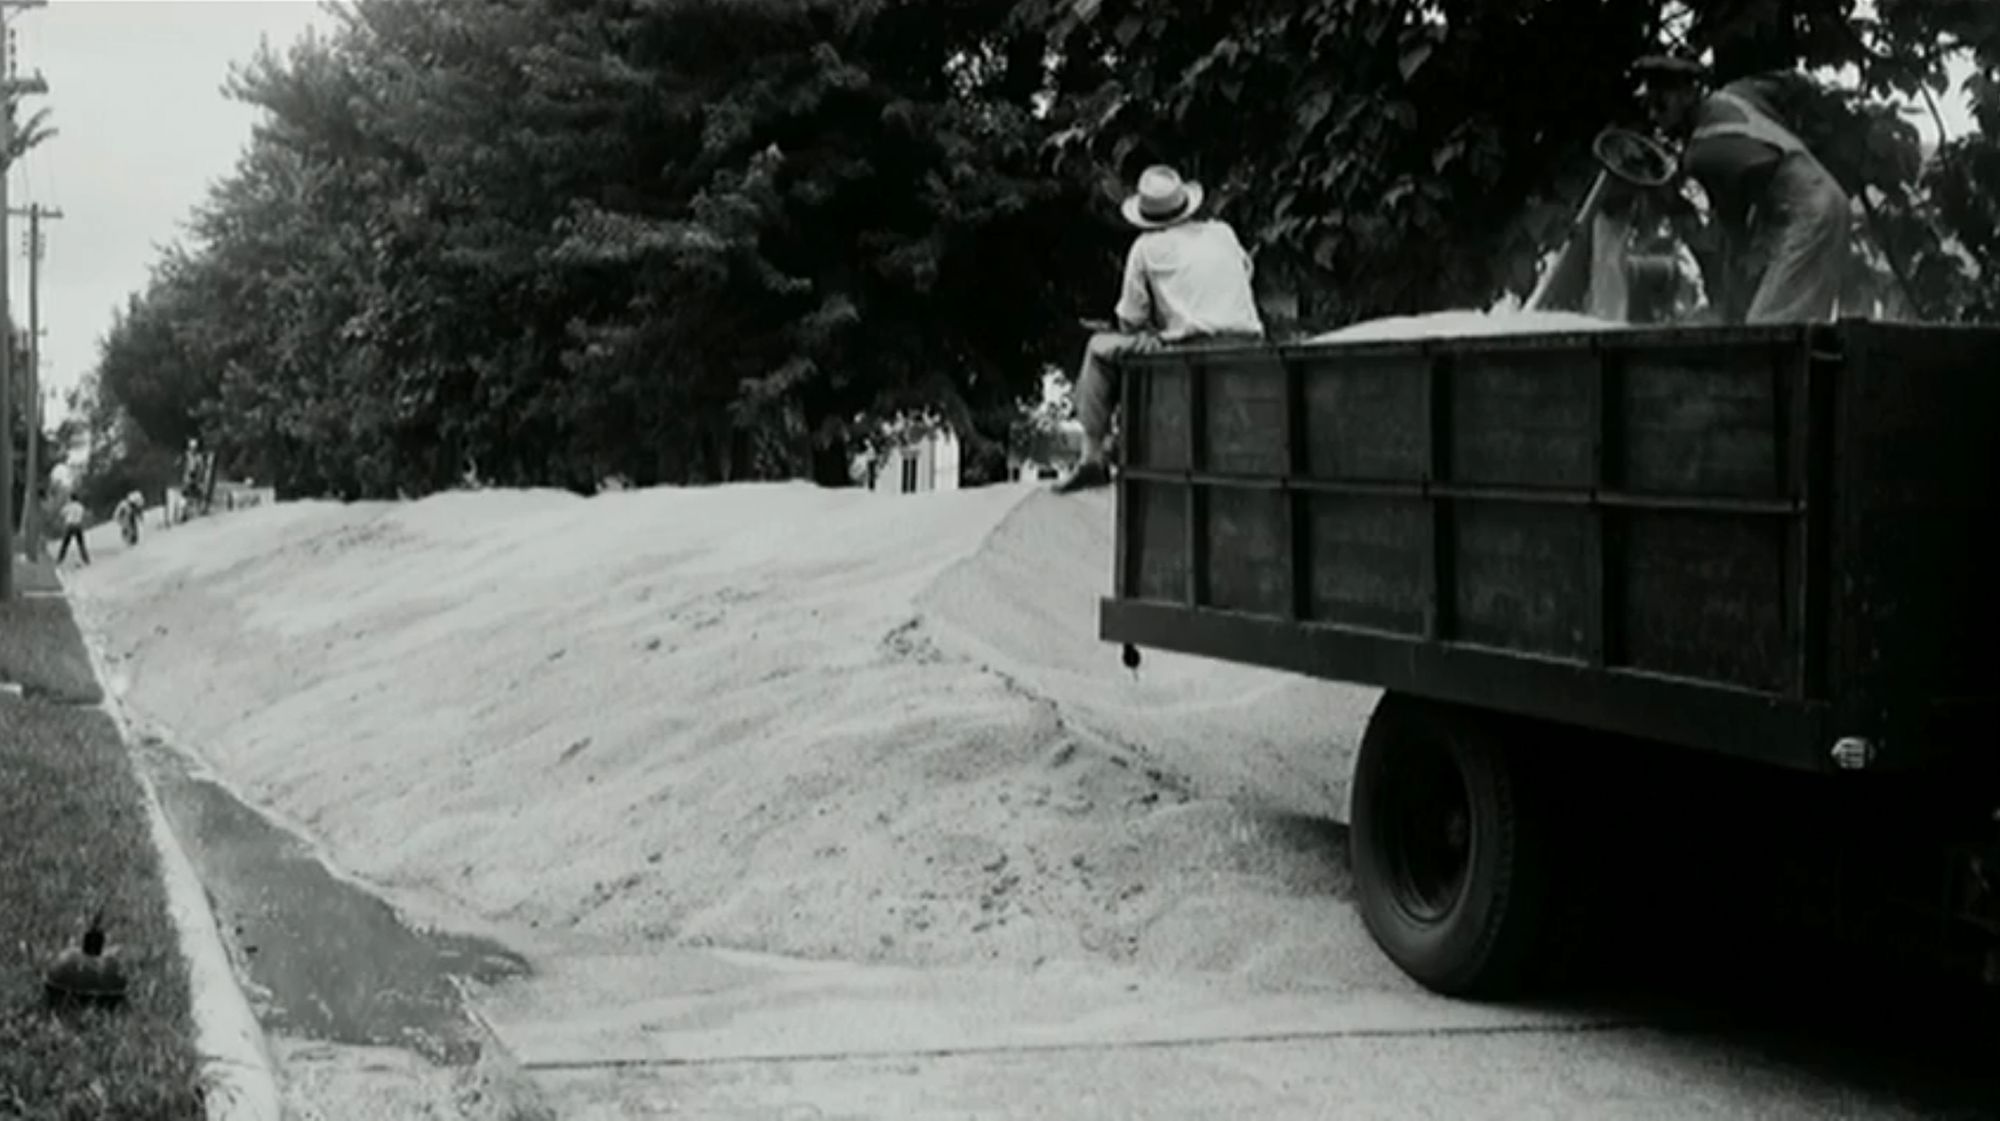 "The Great Plow Up” 1930s — Photo from National Archive, fr The Dust Bowl ep. 1 - Ken
Burns. PBS.